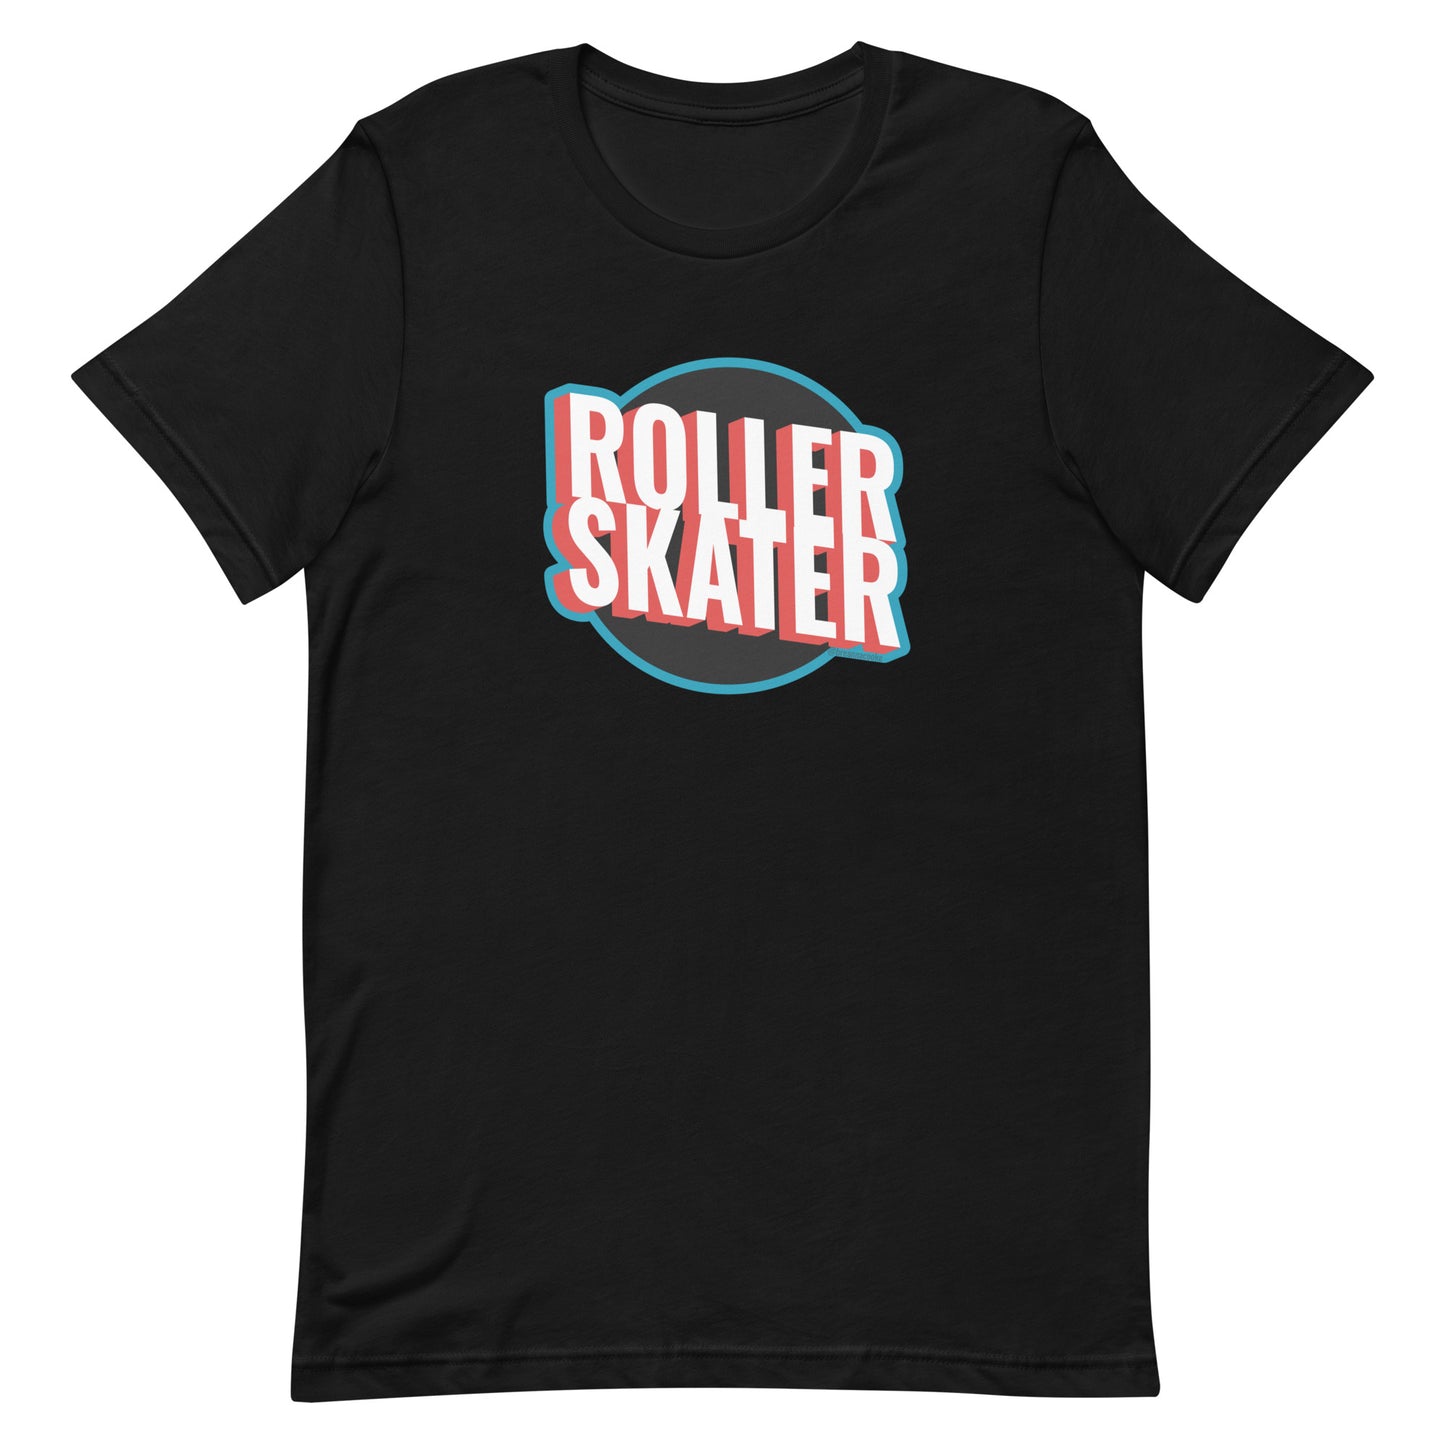 Black t-shirt with retro words "Roller Skater" in circle